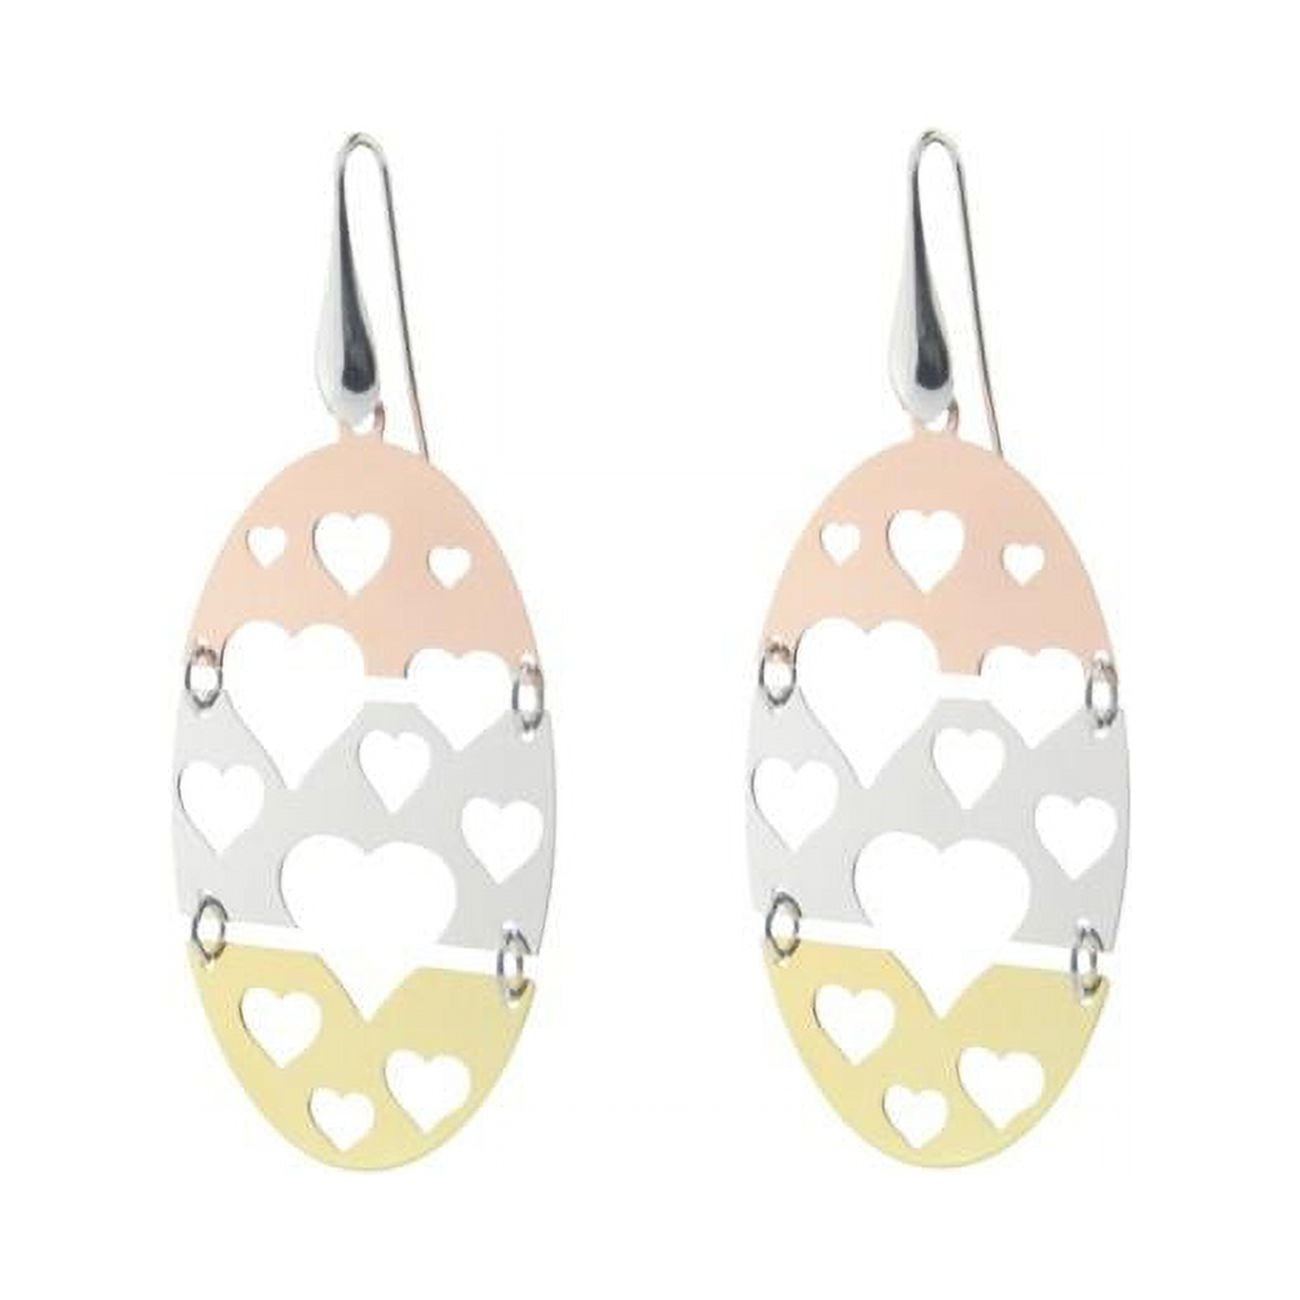 95122 2.5 In. Large Oval Hearts Cutout Hook Earrings In Sterling Silver - Gold, Pink & Silver